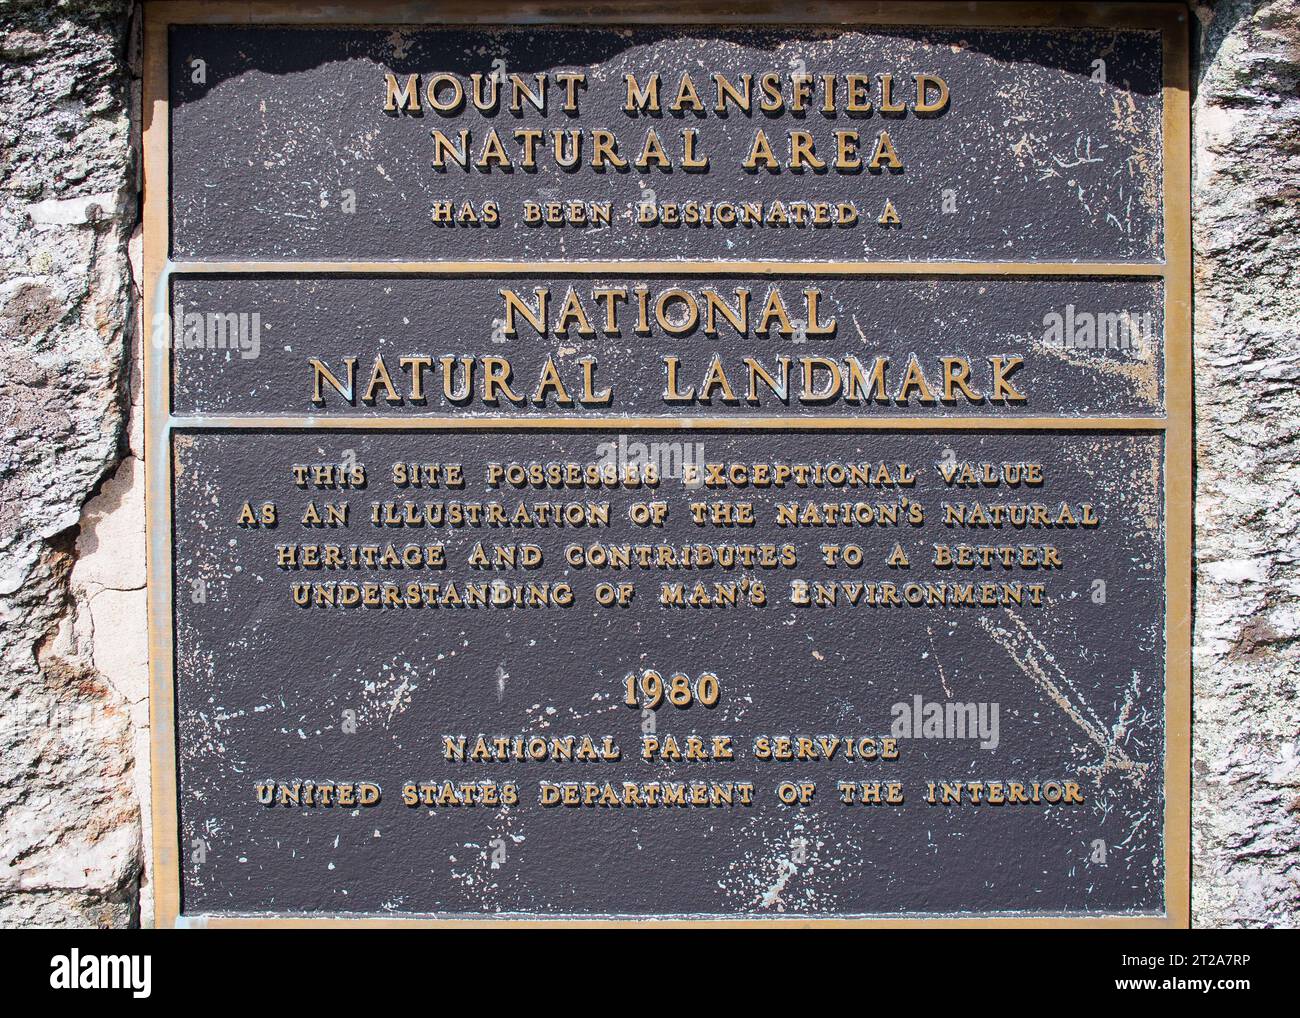 Vermont, USA - 09 28 2016: Mount Mansfield Natural Area Sign: A Natural Landmark in Vermont, USA. Stock Photo